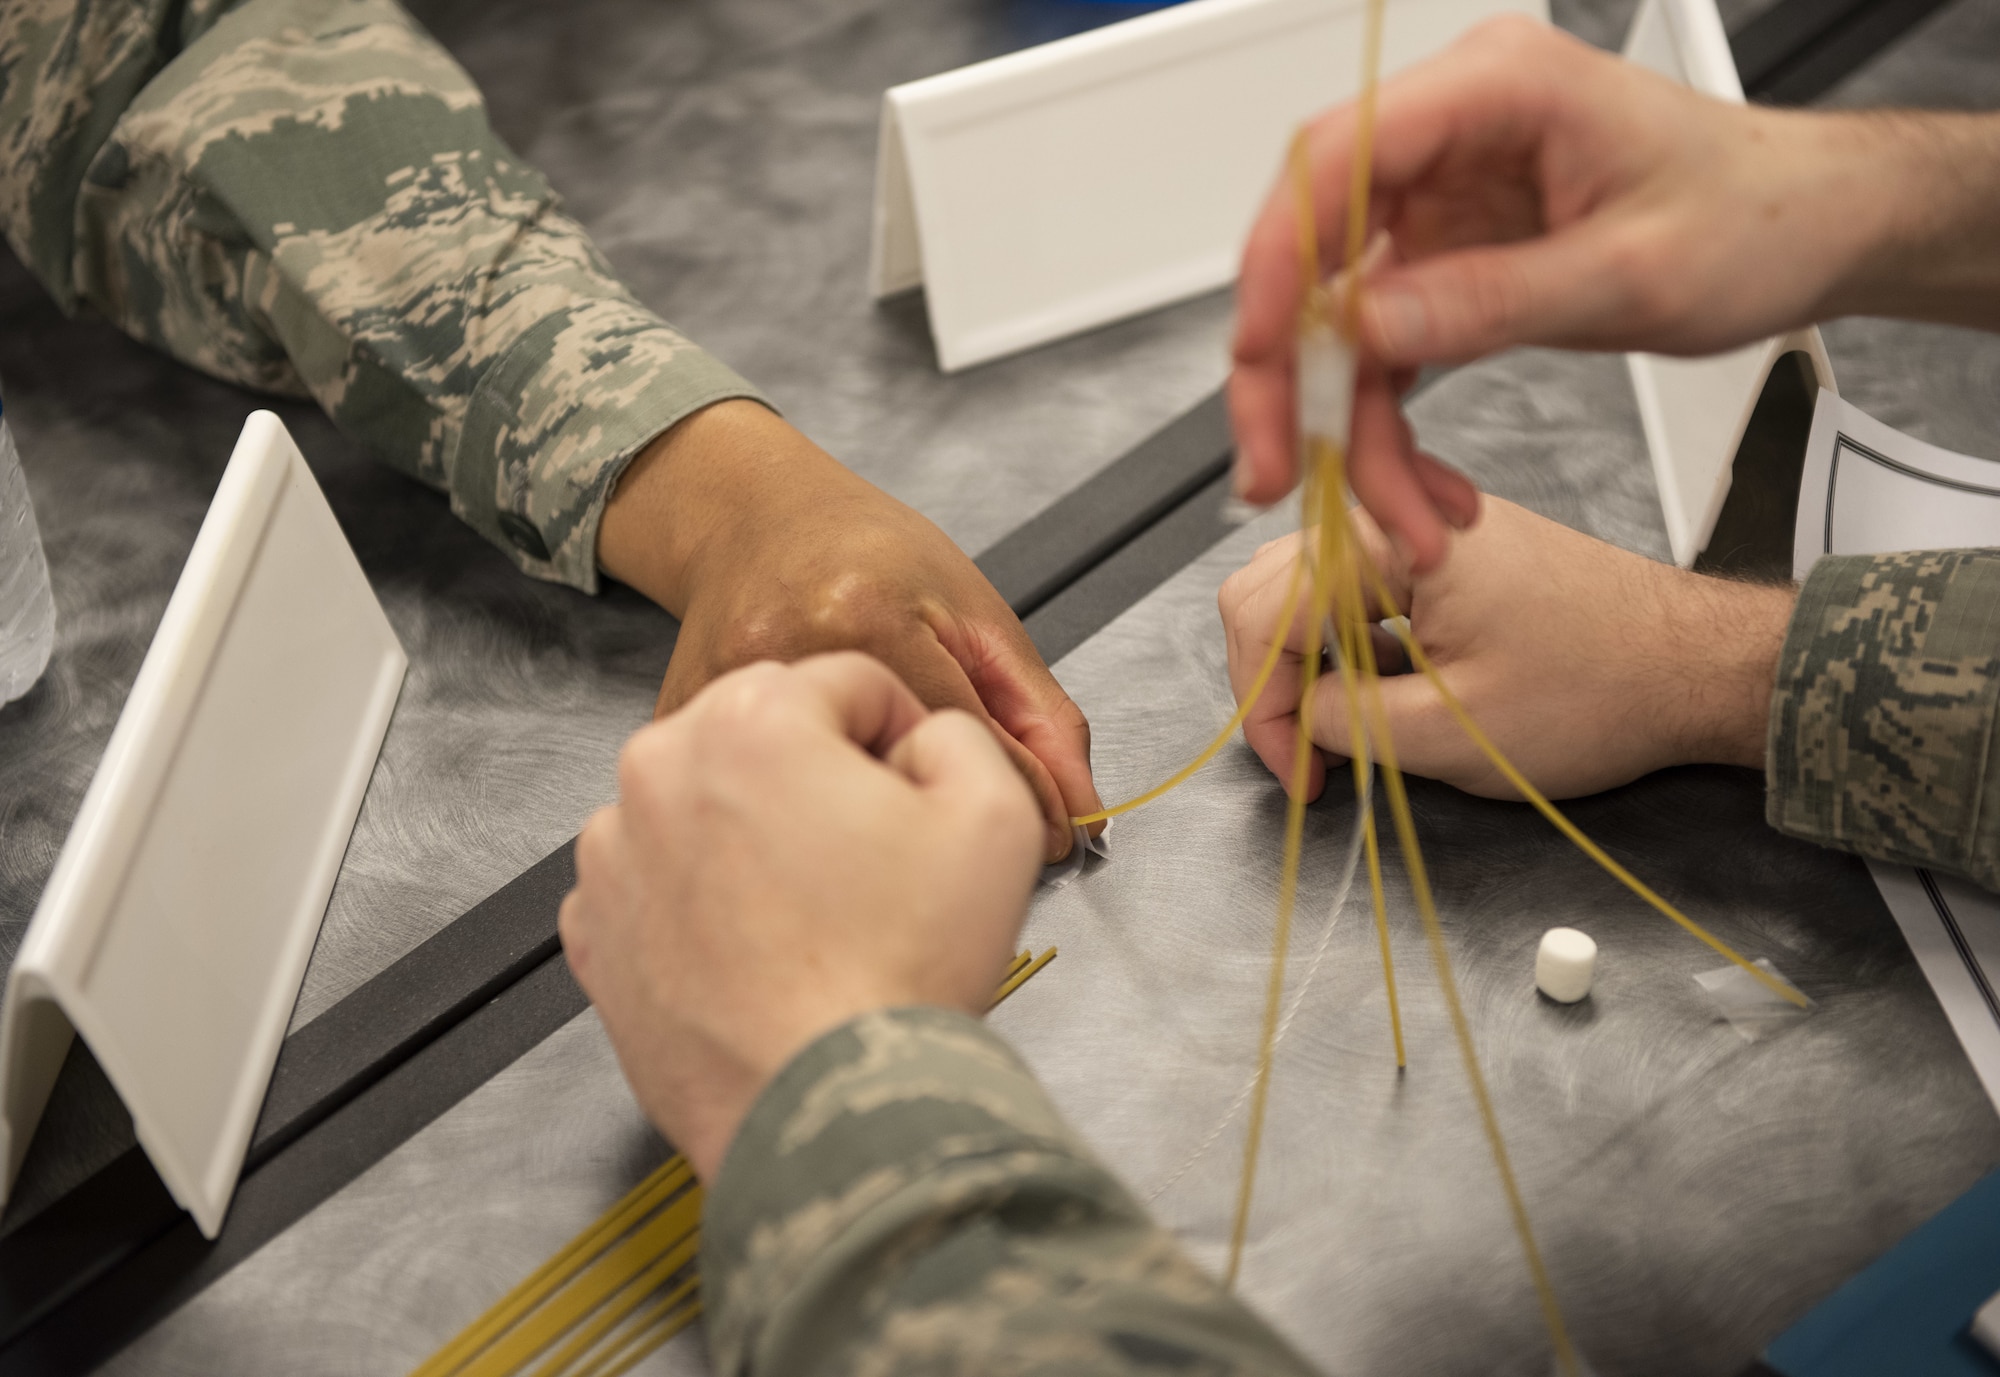 Airmen in the First Term Airman Course class work together during a competition Jan. 10, 2018, at Travis Air Force Base, Calif. Airmen attend FTAC to help transition from the technical training atmosphere to the operational Air Force. (U.S. Air Force photo by Airman 1st Class Jonathon Carnell)